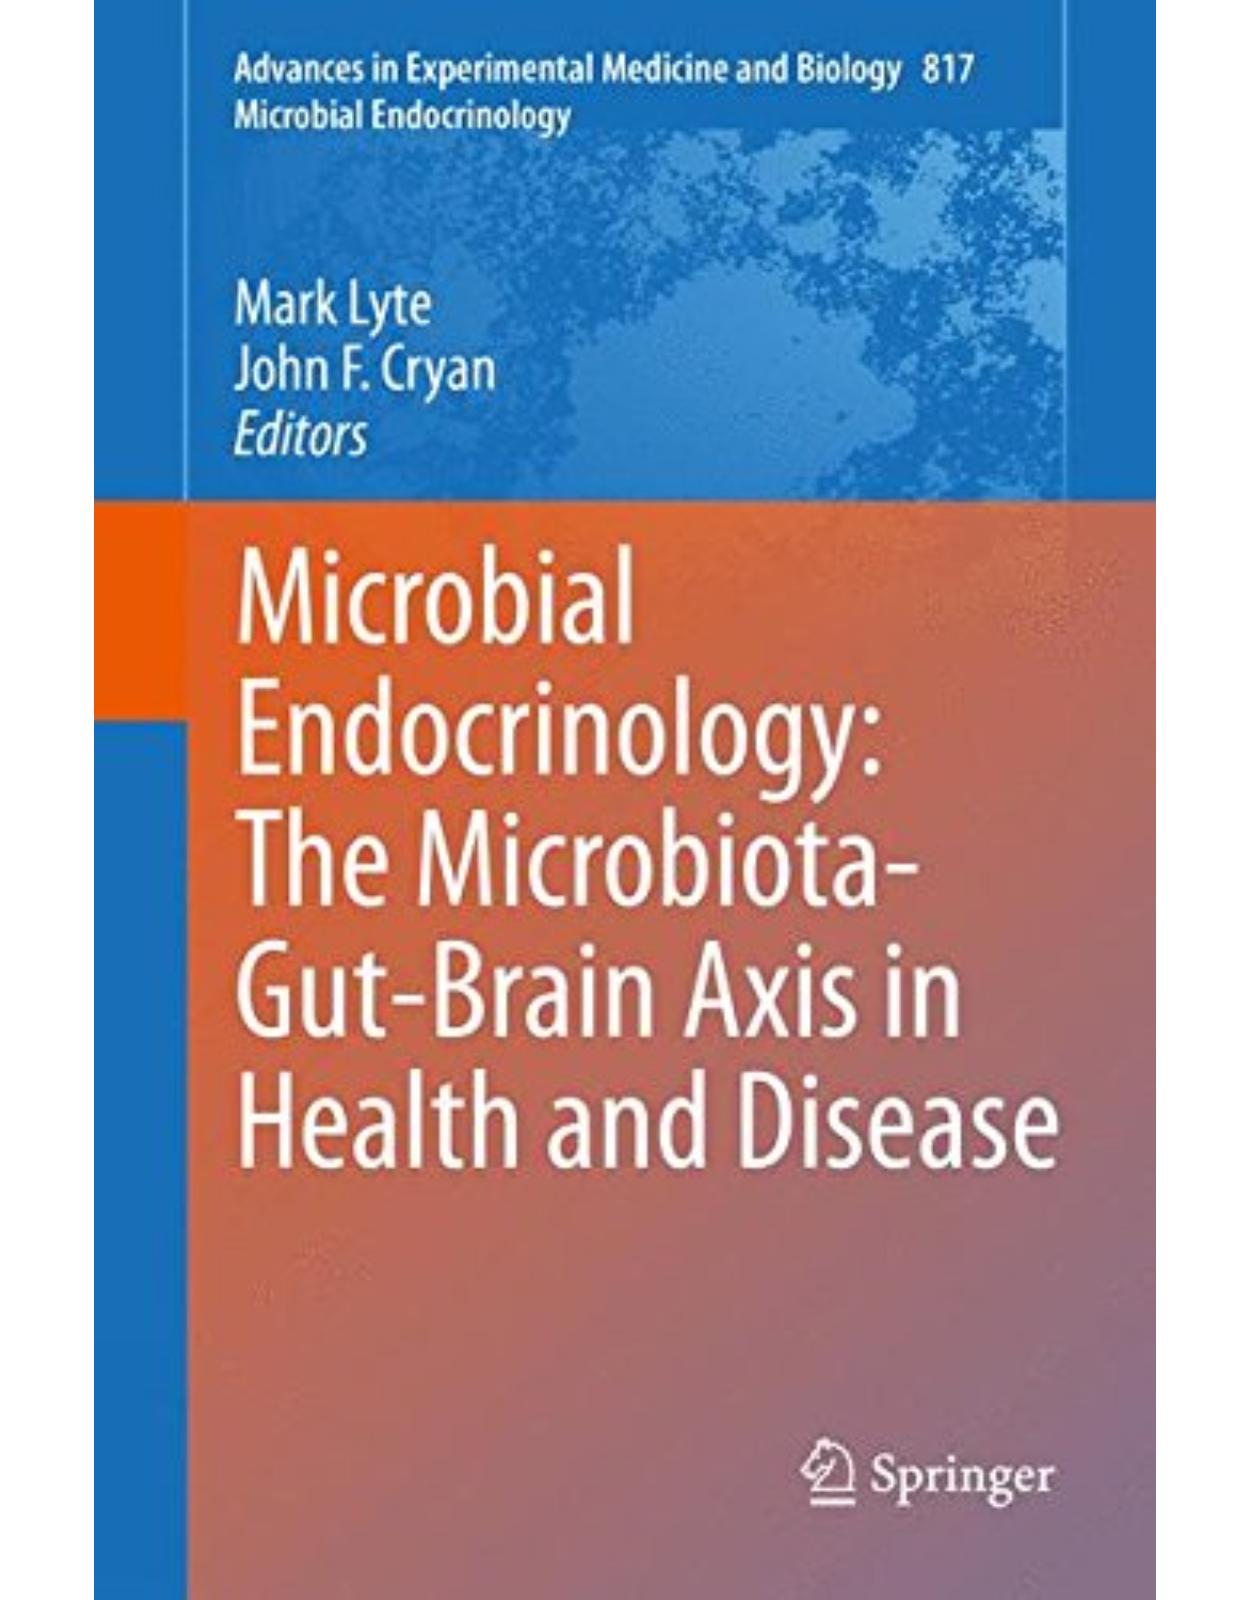 Microbial Endocrinology: The Microbiota-Gut-Brain Axis in Health and Disease 